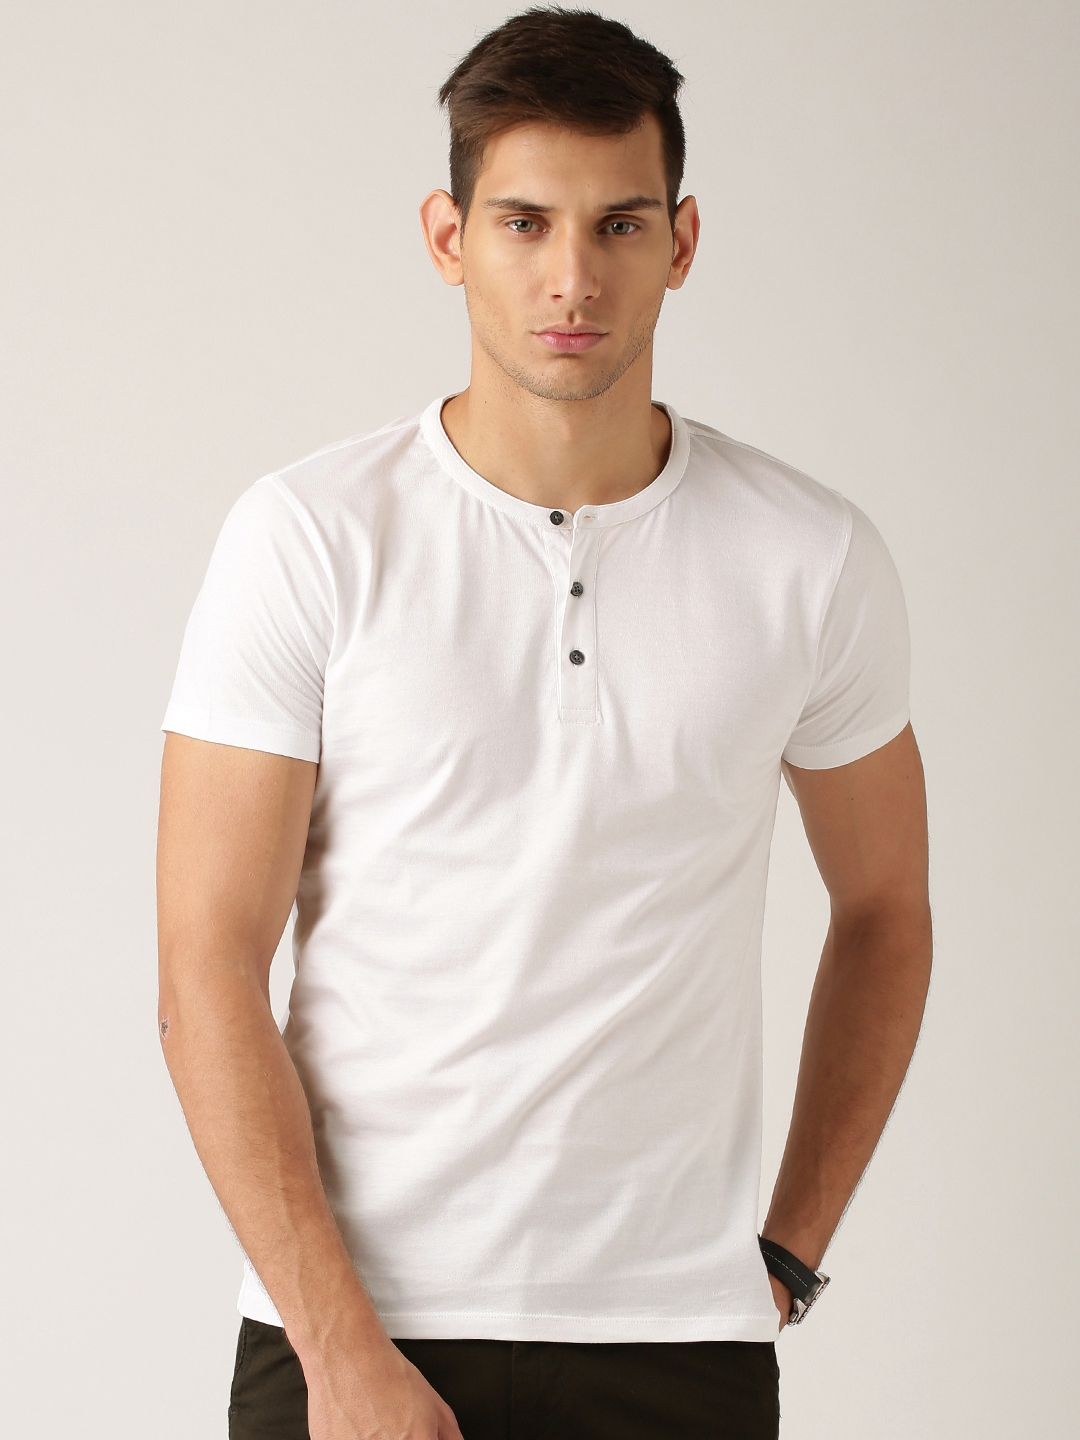 Buy ETHER White Henley Pure Cotton T Shirt - Tshirts for Men 1197816 ...